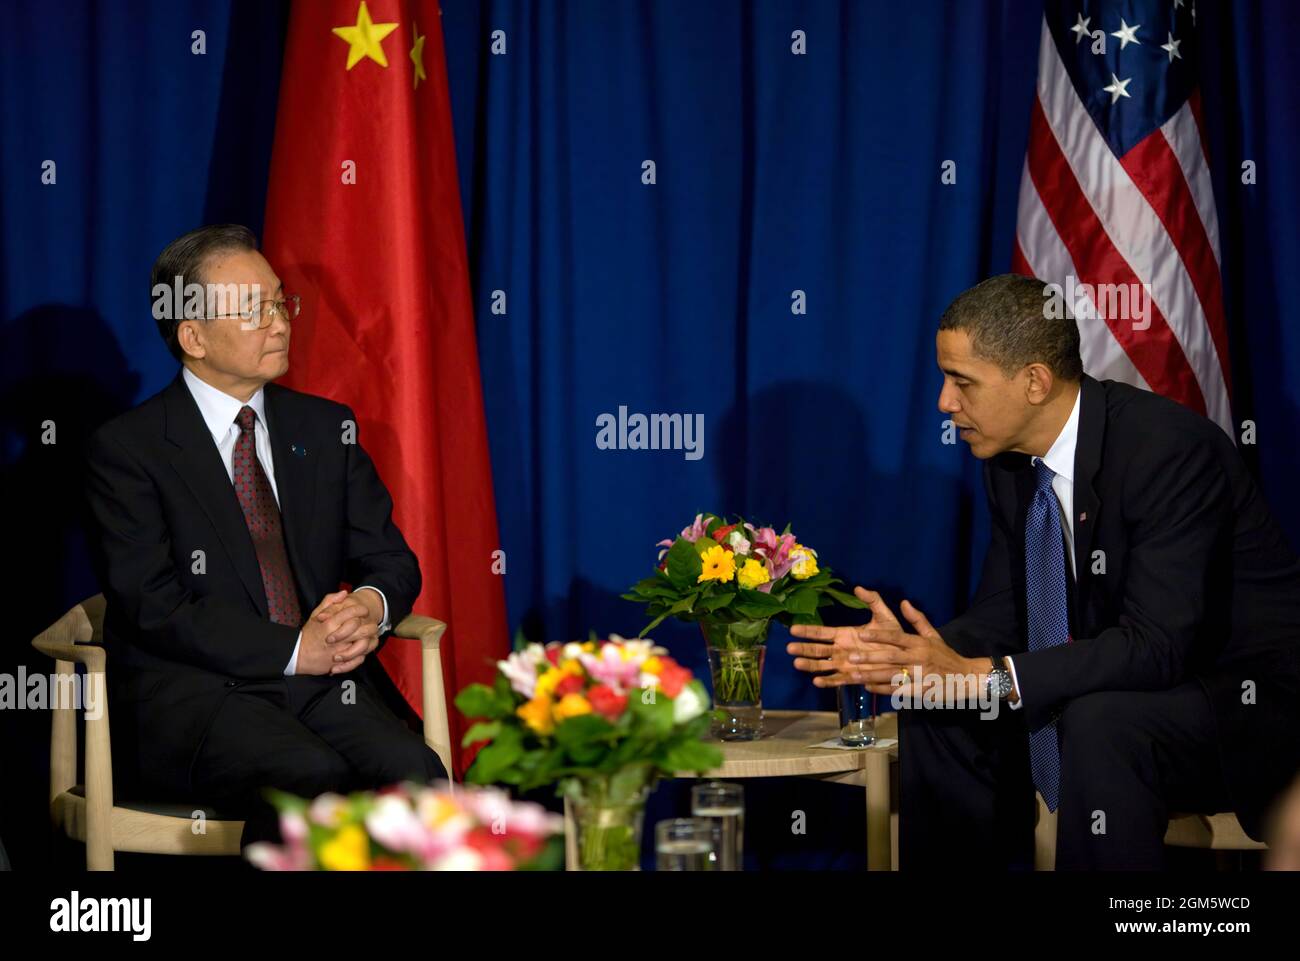 President Barack Obama meets with Chinese Premier Wen Jiabao during a bilateral at the United Nations Climate Change Conference in Copenhagen, Denmark, Dec. 18, 2009. (Official White House Photo by Pete Souza) This official White House photograph is being made available only for publication by news organizations and/or for personal use printing by the subject(s) of the photograph. The photograph may not be manipulated in any way and may not be used in commercial or political materials, advertisements, emails, products, promotions that in any way suggests approval or endorsement of the Presiden Stock Photo